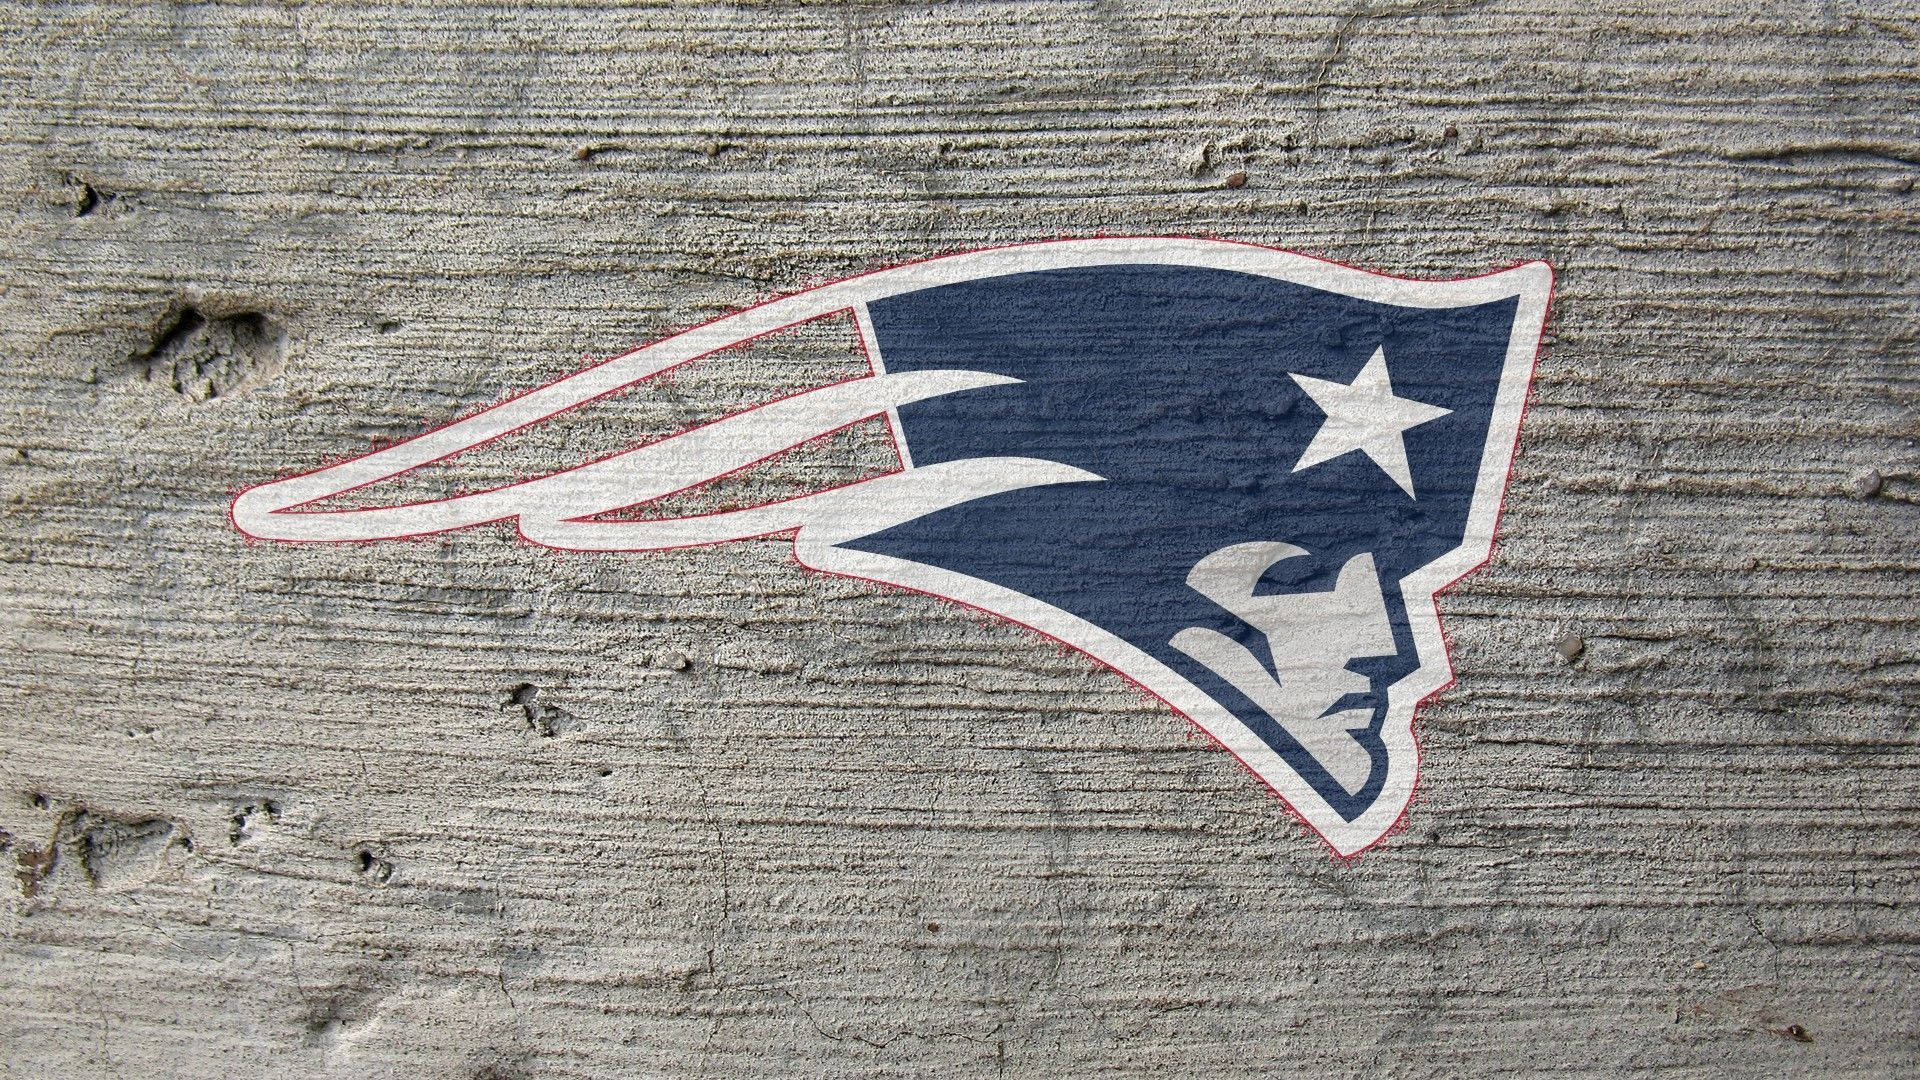 200+] New England Patriots Wallpapers for FREE 